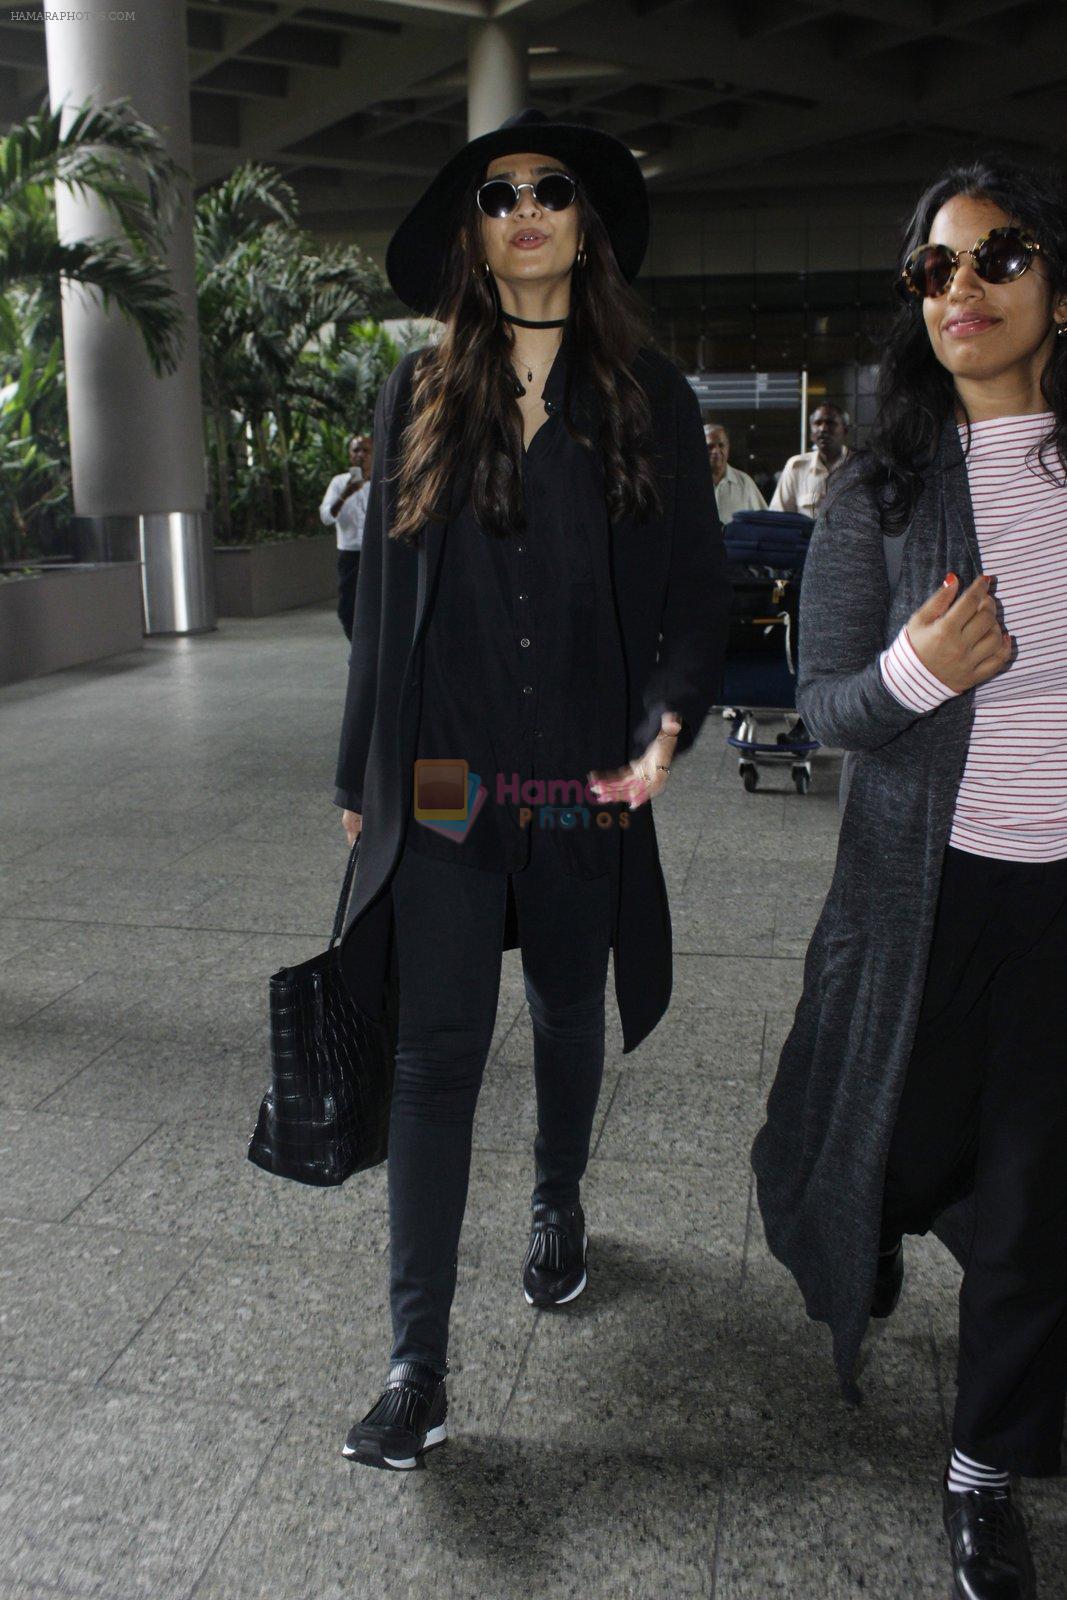 Sonam Kapoor at Airport on 6th July 2016